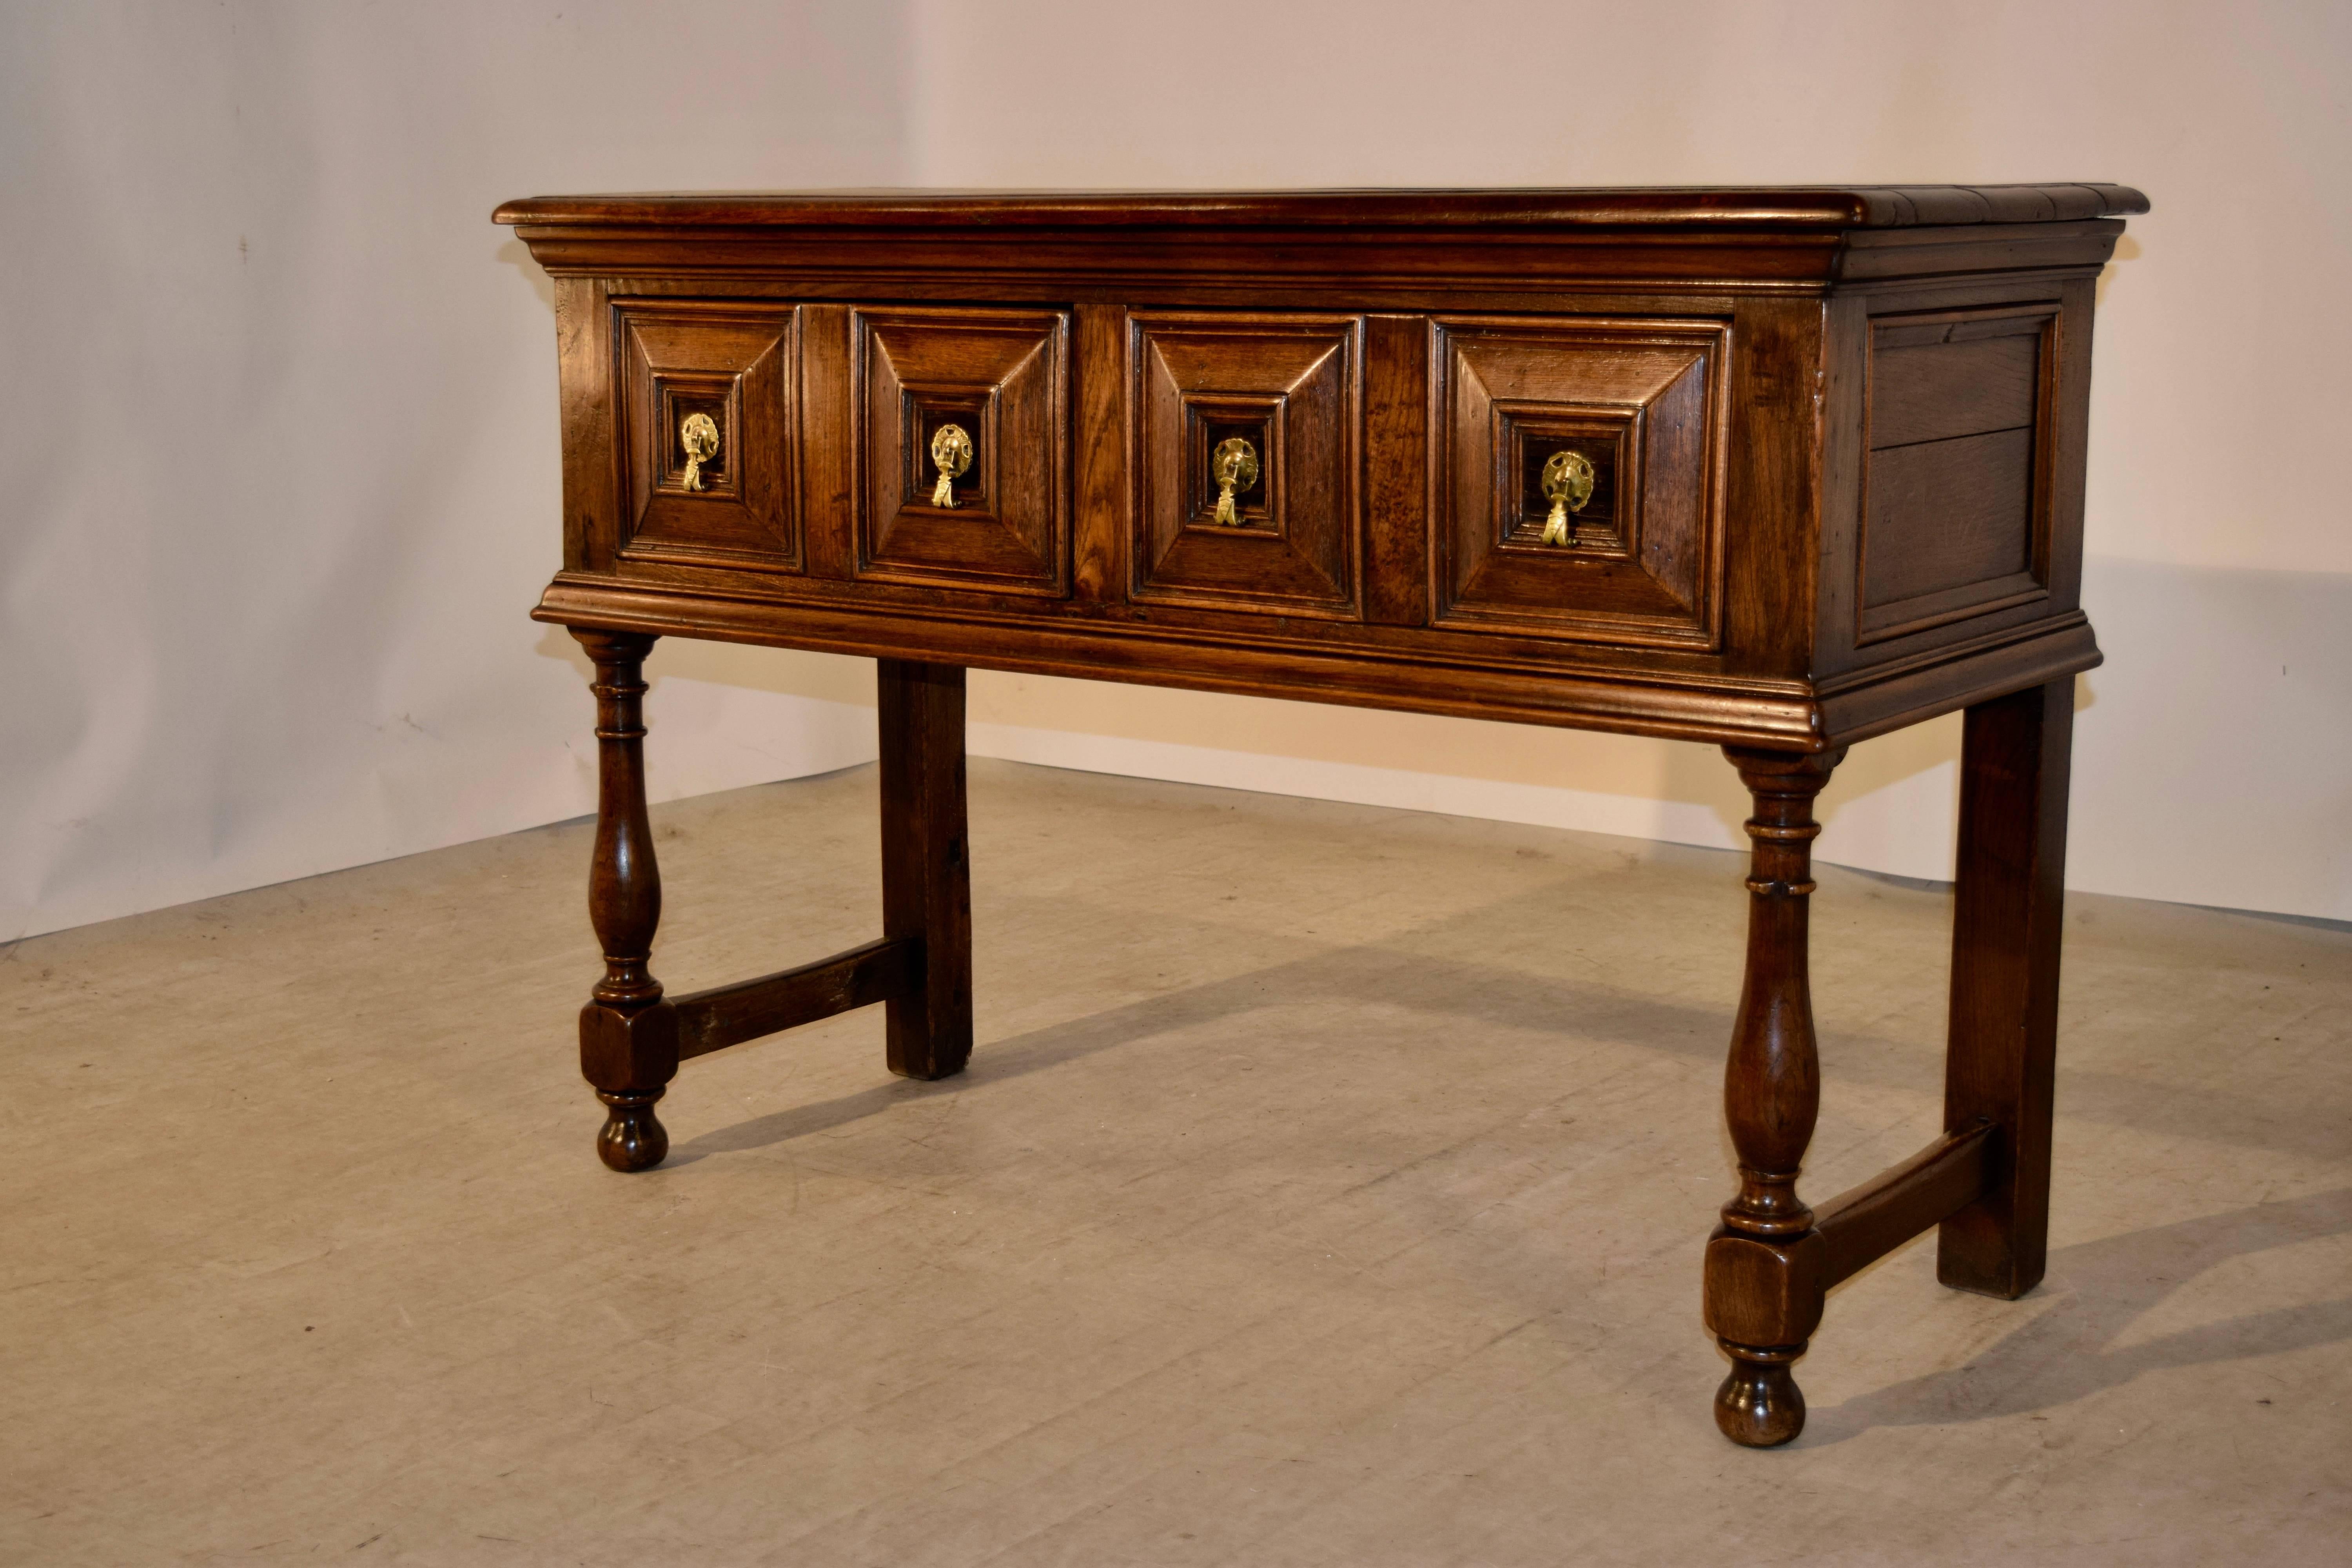 18th century English oak sideboard with a beveled edge around the top, following down to hand paneled sides and two drawers in the front with cushion panels. The piece is raised on hand turned legs in the front and simple legs in the back, joined by